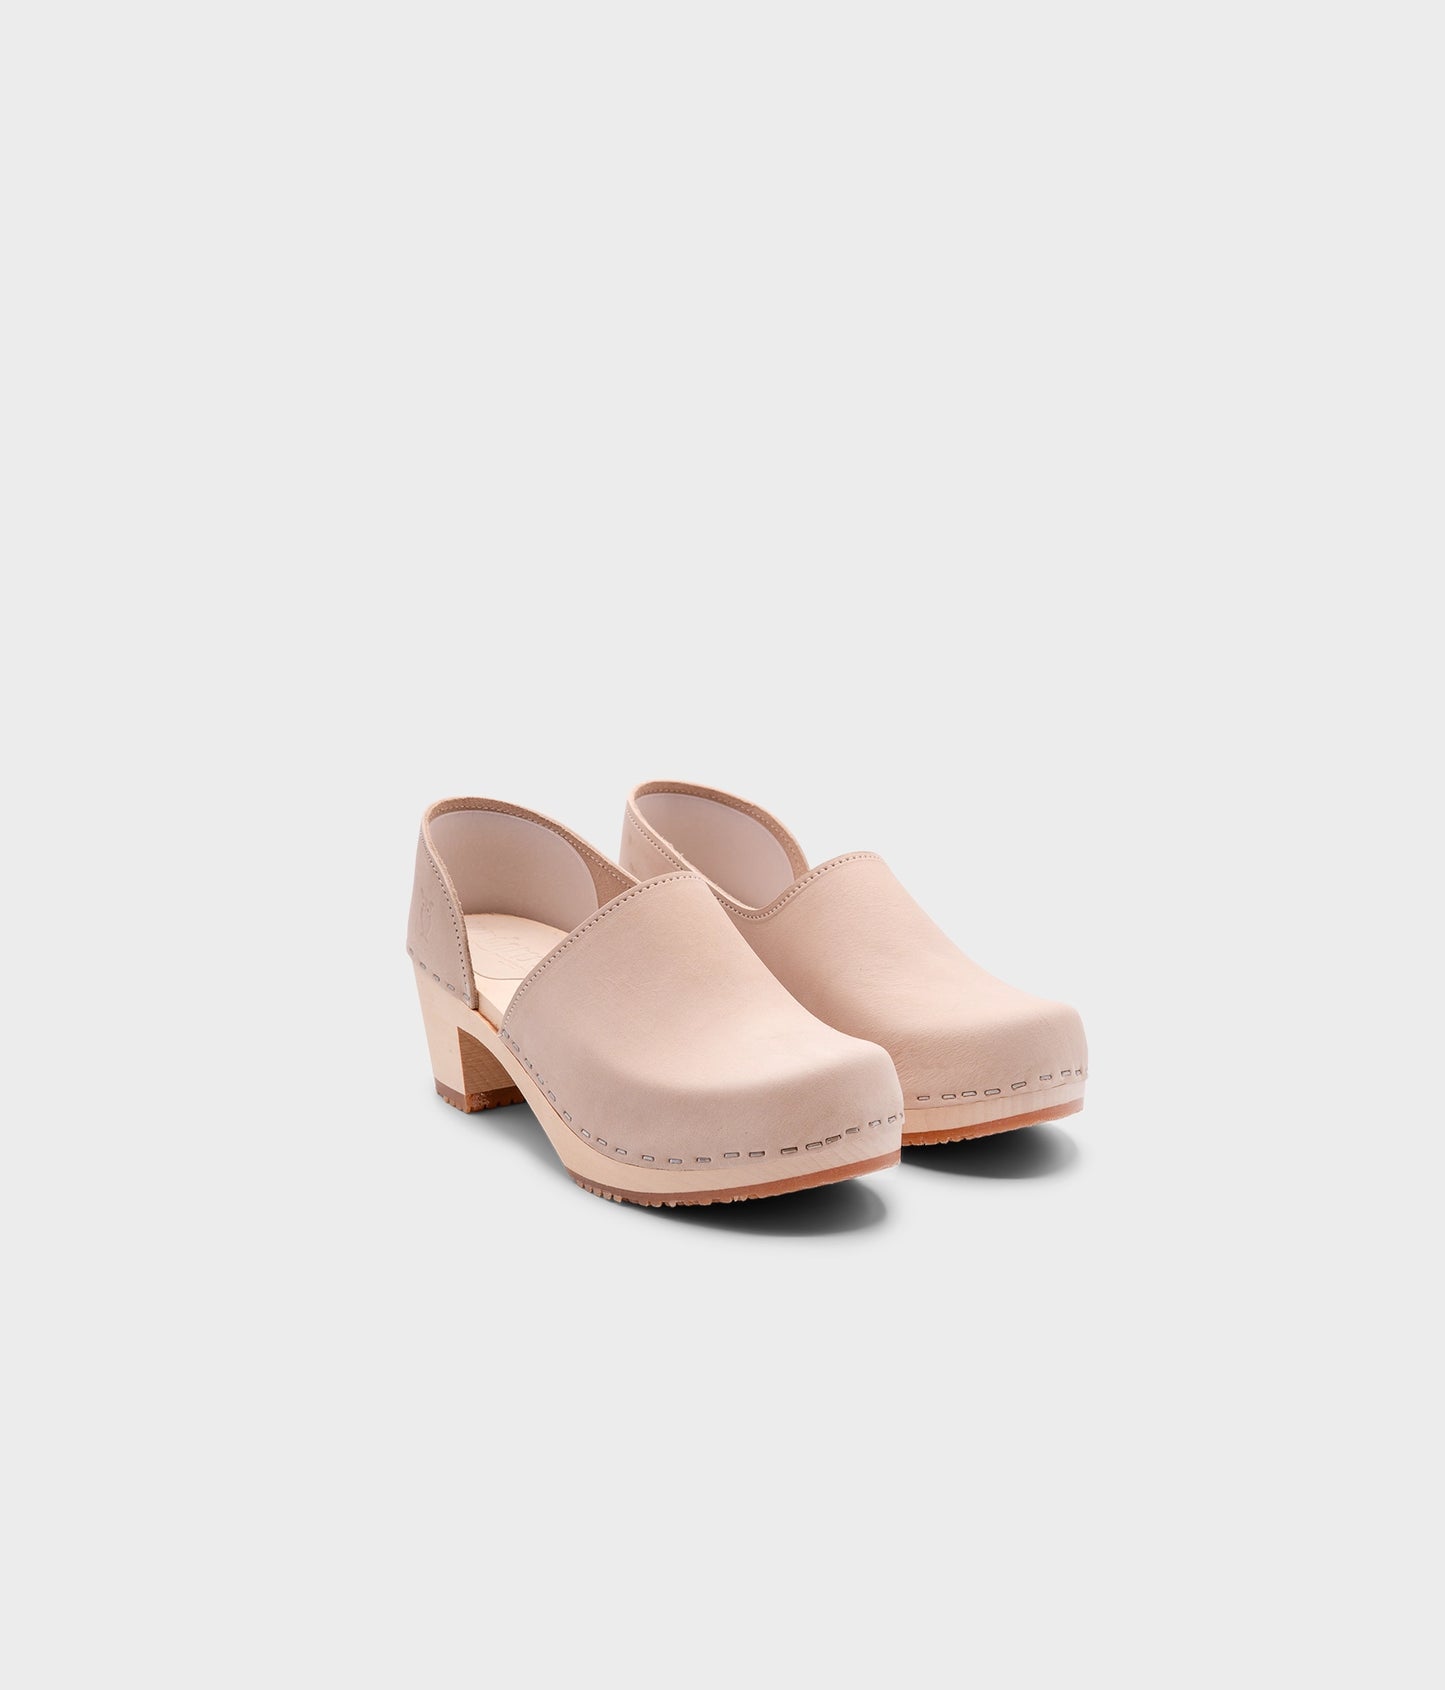 high heeled closed-back clogs in sand white nubuck leather stapled on a light wooden base